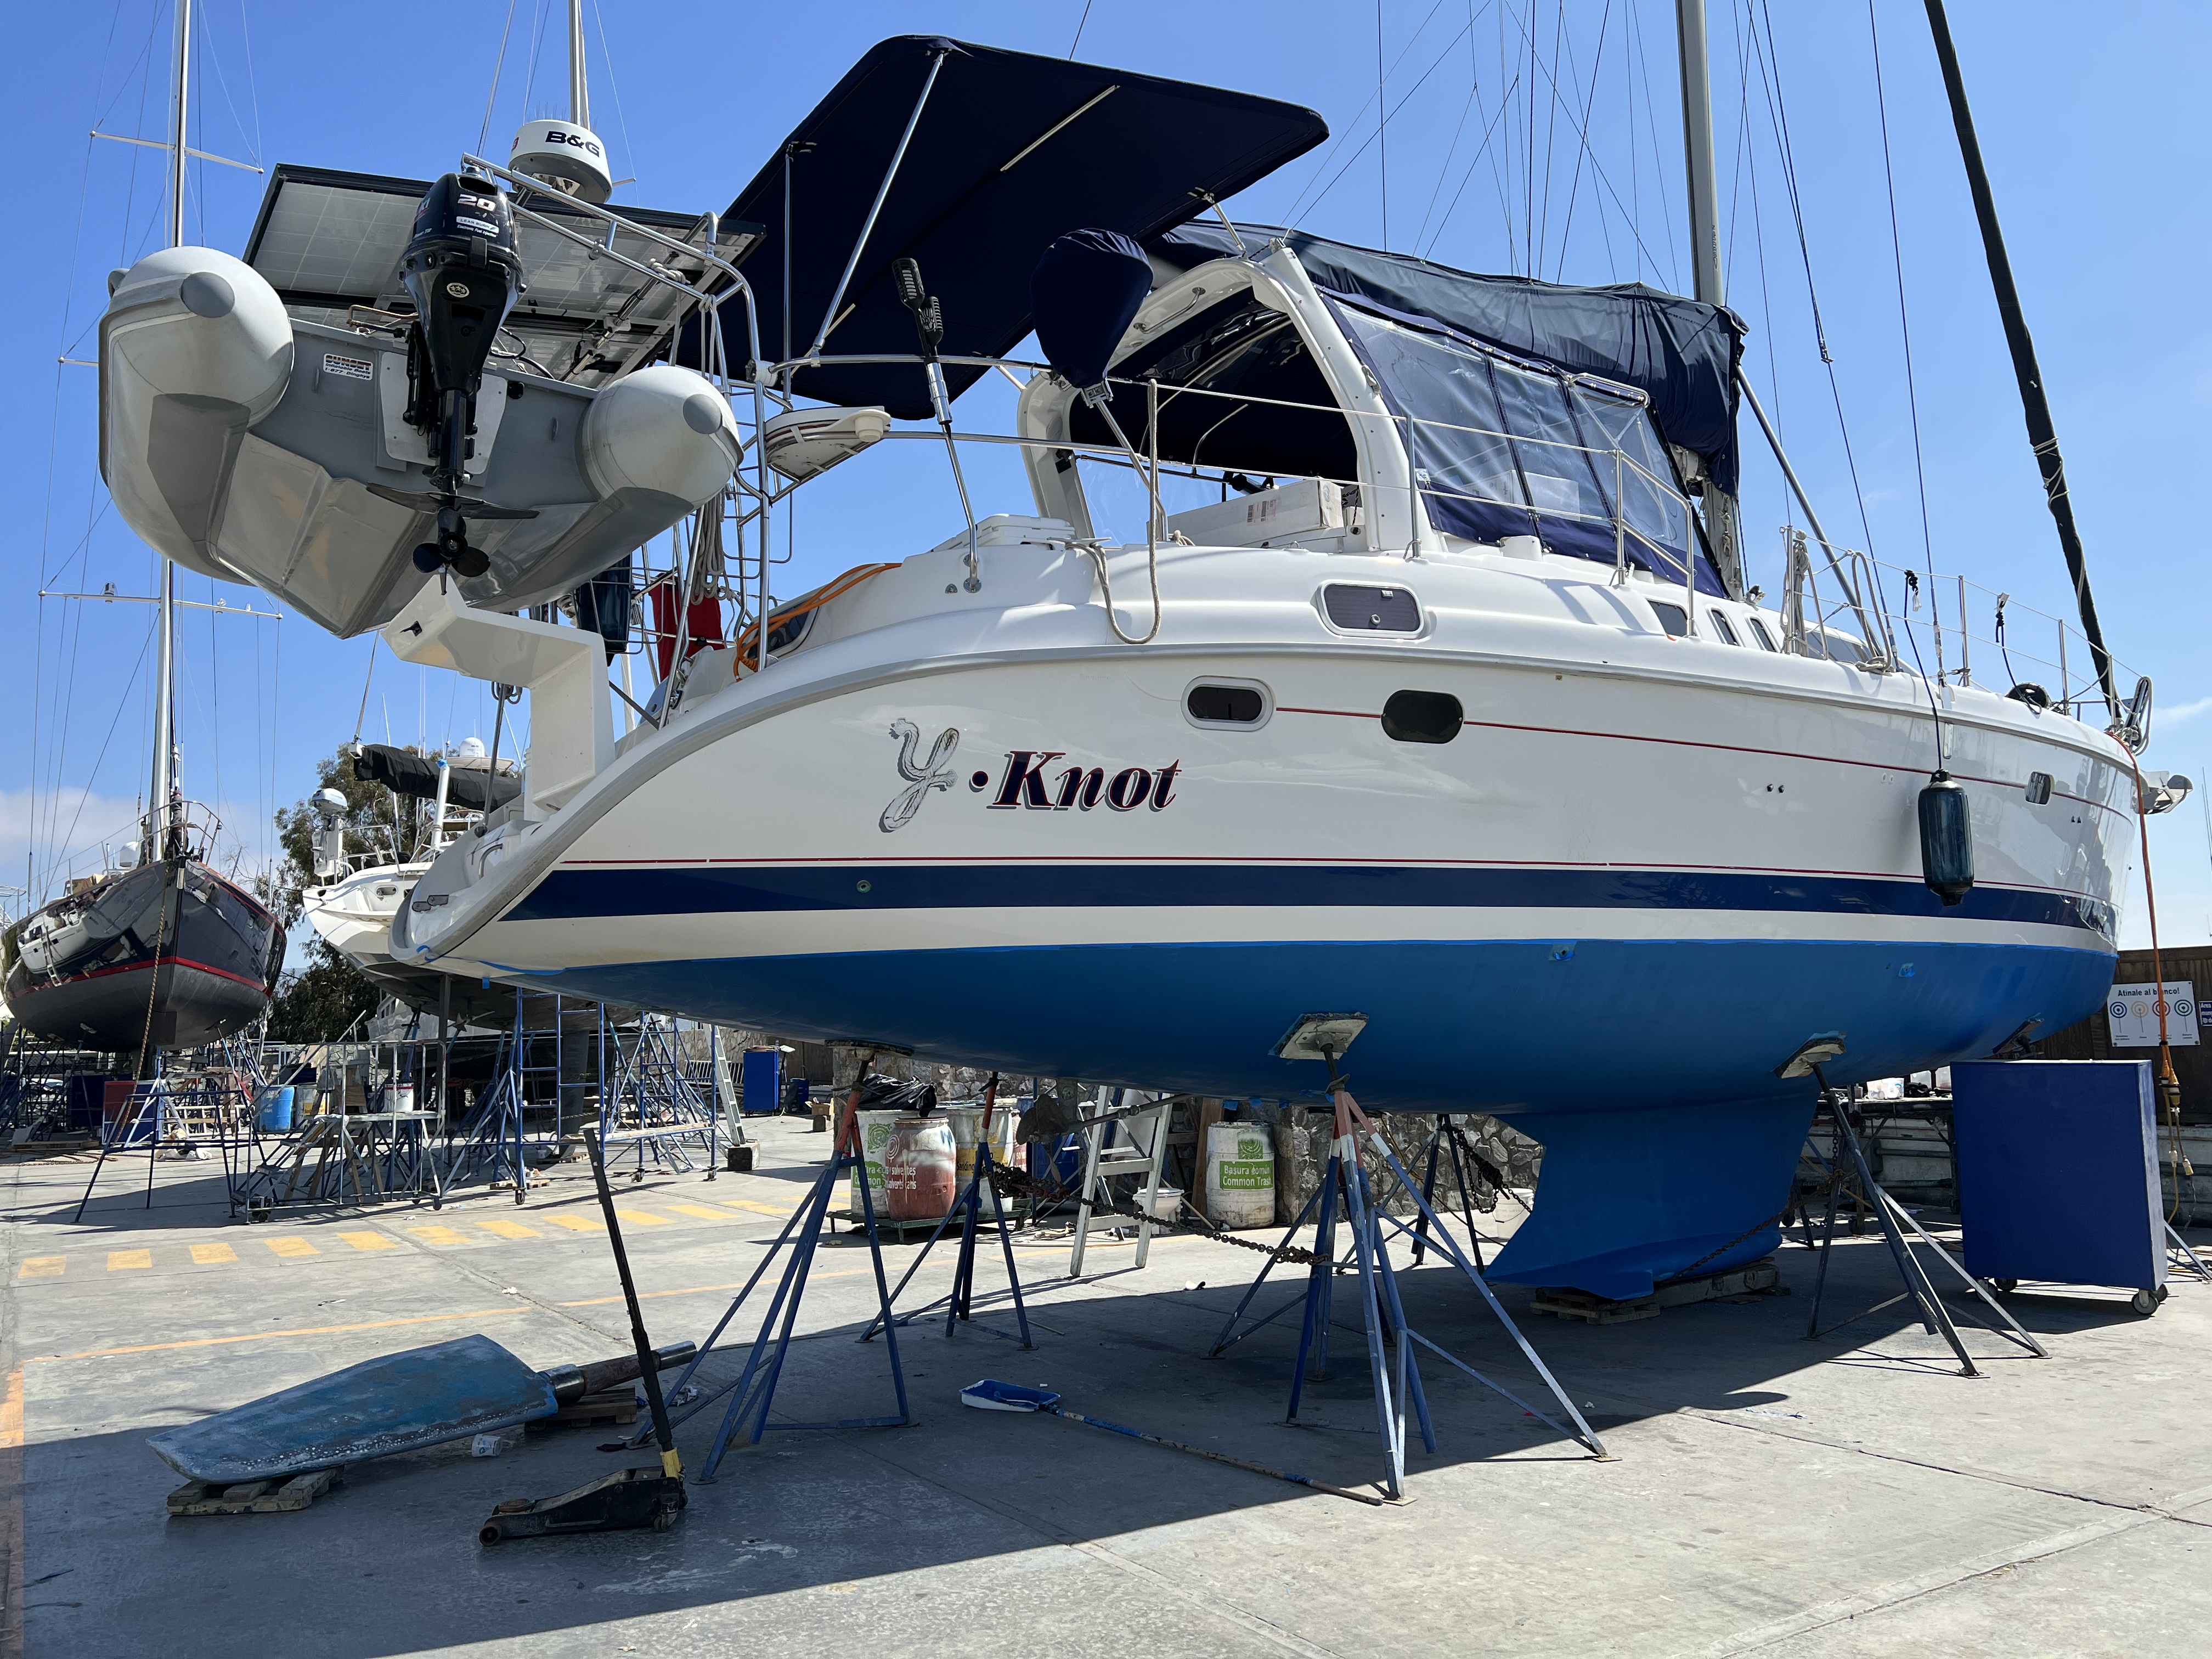 1998 Hunter Passage 450 Sailboat for sale in Long Beach, CA - image 6 